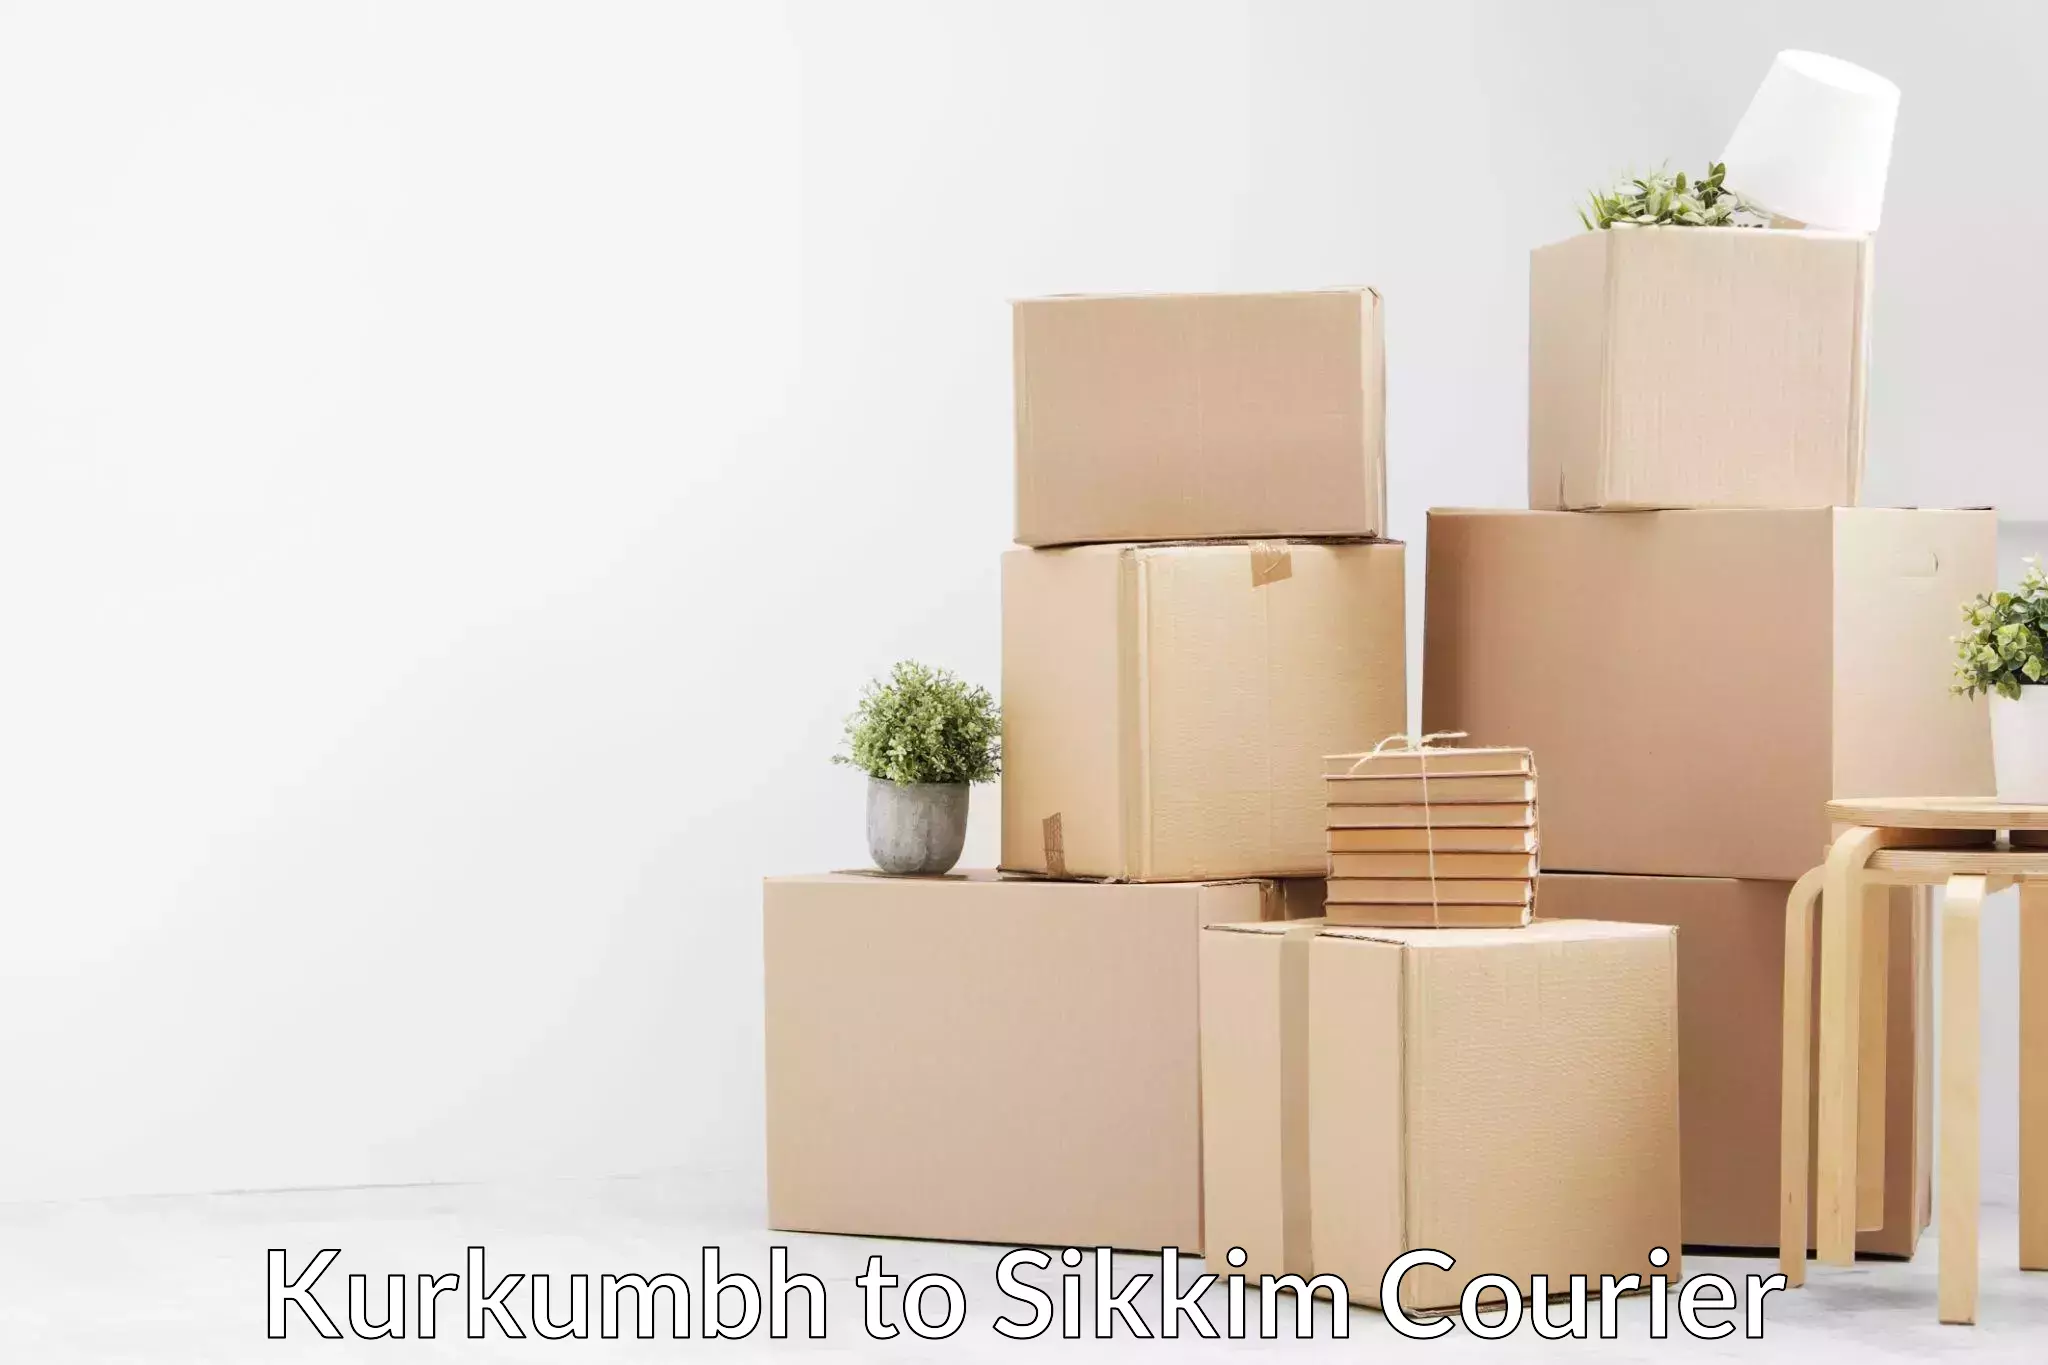 Quality relocation services in Kurkumbh to East Sikkim